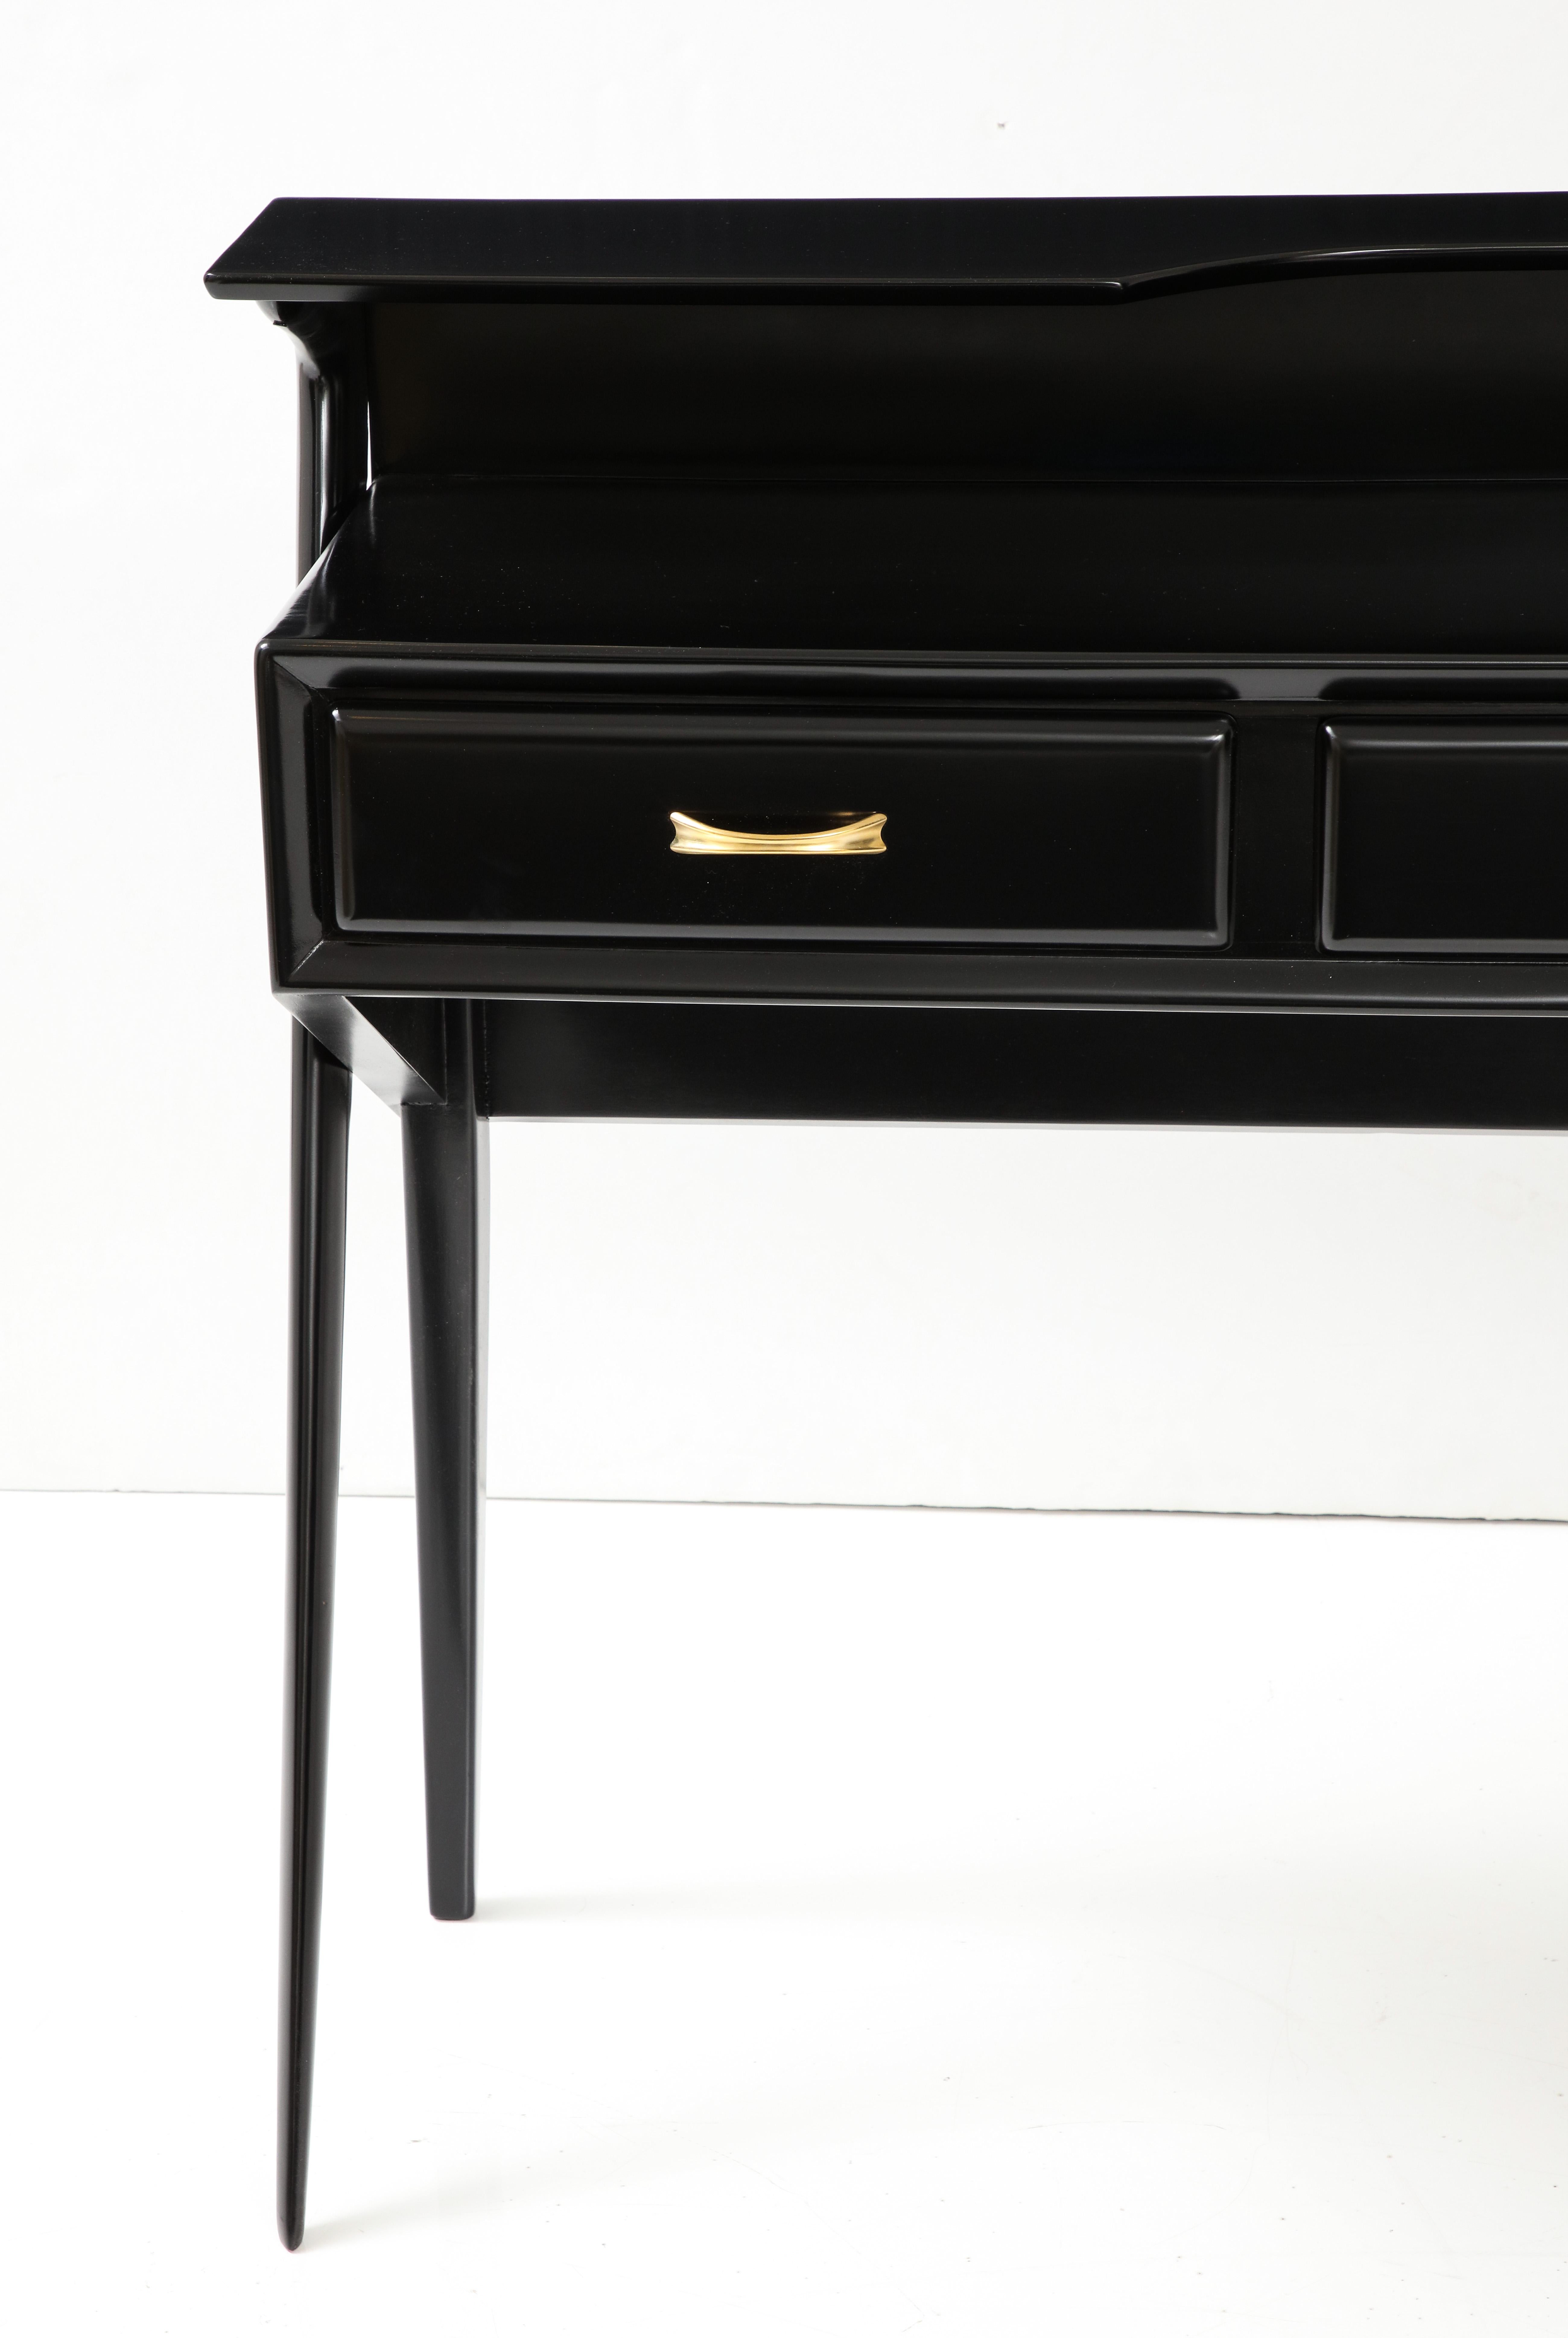 1950s sculptural Italian two tier console in black lacquer with brass hardware and three drawers in the style of Ico Parisi, fully restored in black lacquer with minor  wear and patina due to age and use.